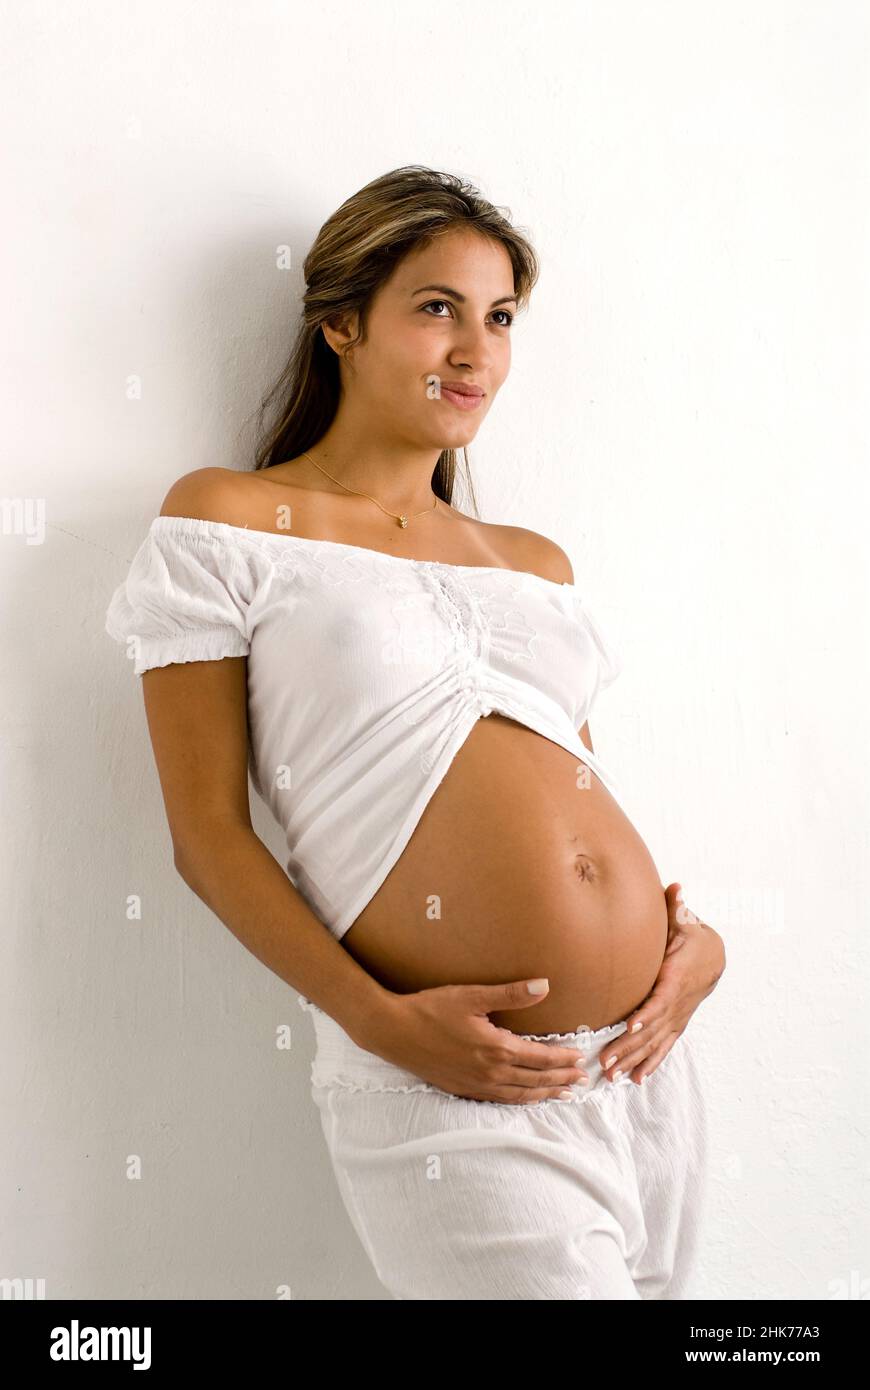 Portrait of young pregnant Hispanic woman, facing forward, holding belly Stock Photo